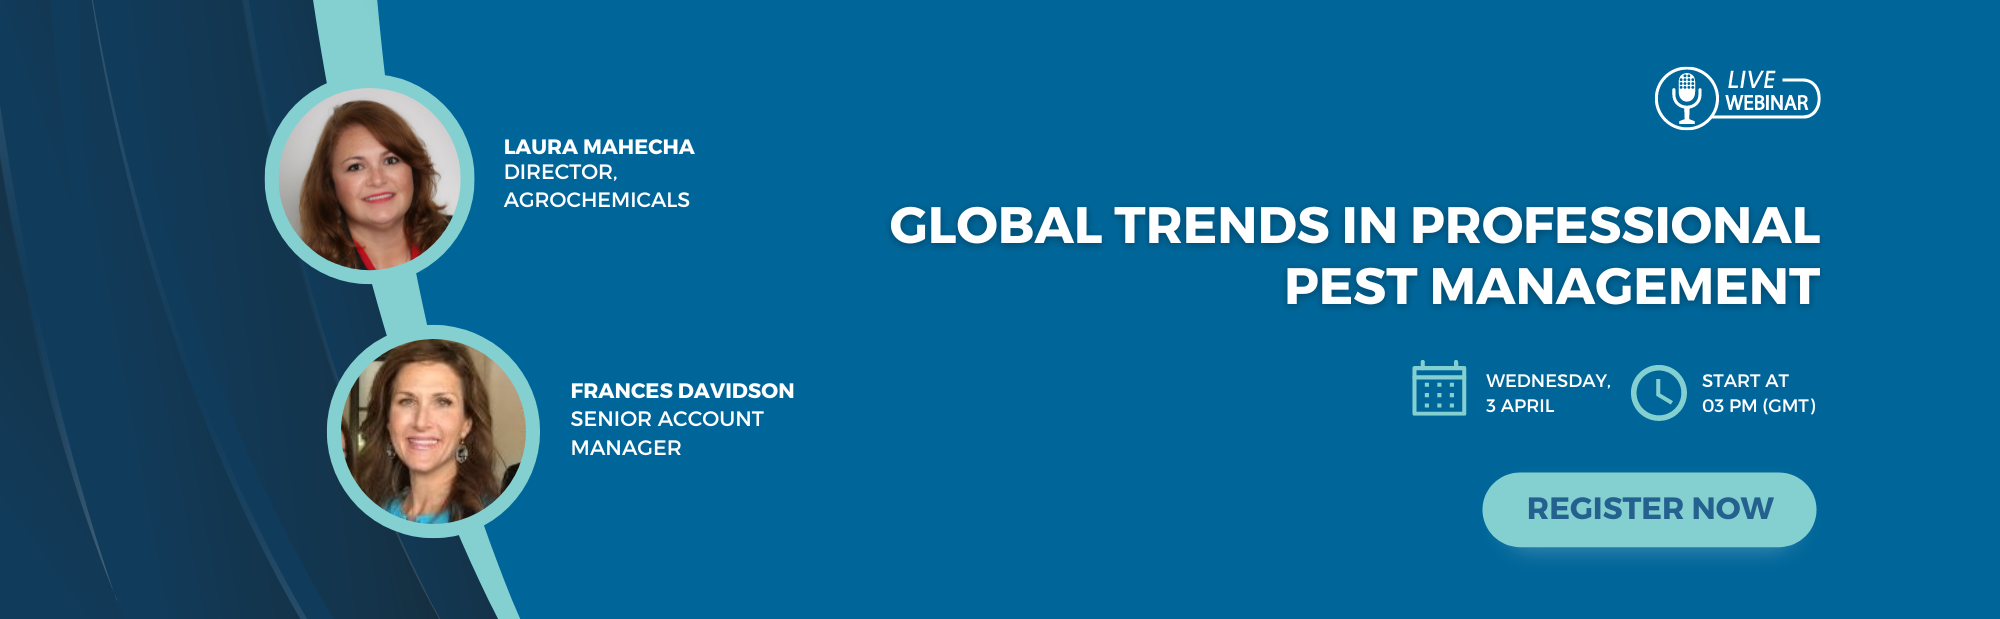 Global Trends in Professional Pest Management homepage banner